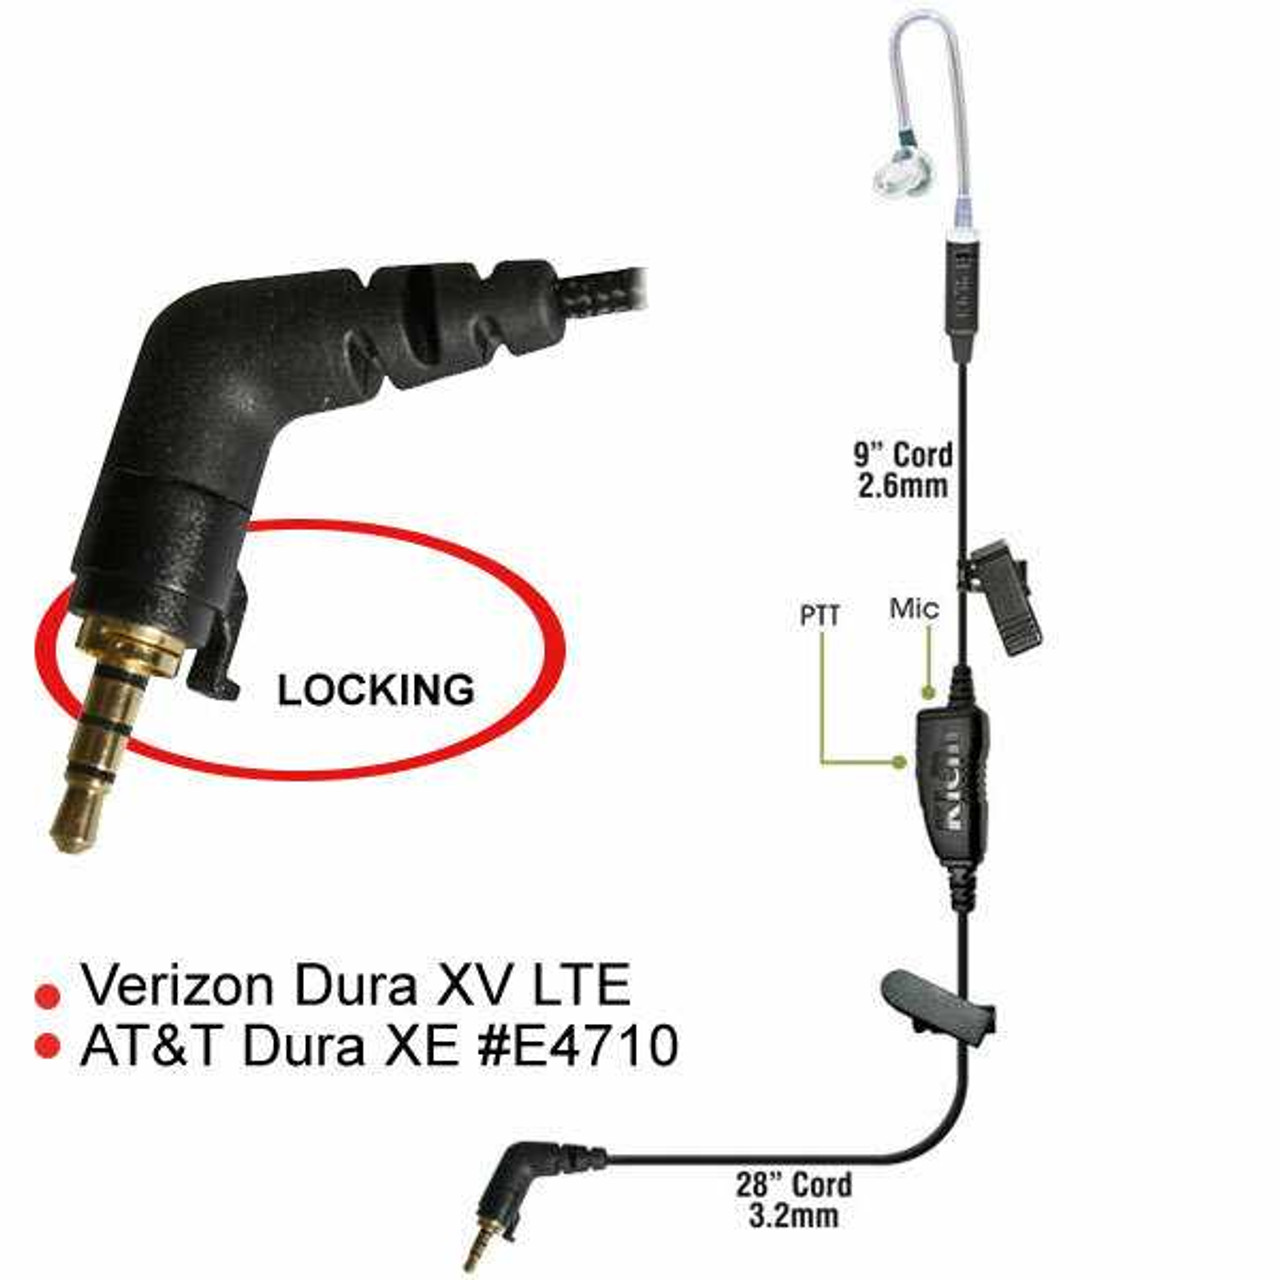 Star-Pro Single-Wire Earpiece with Camlock Connector for Kyocera [[product_type]] kleinelectronics.com 59.95